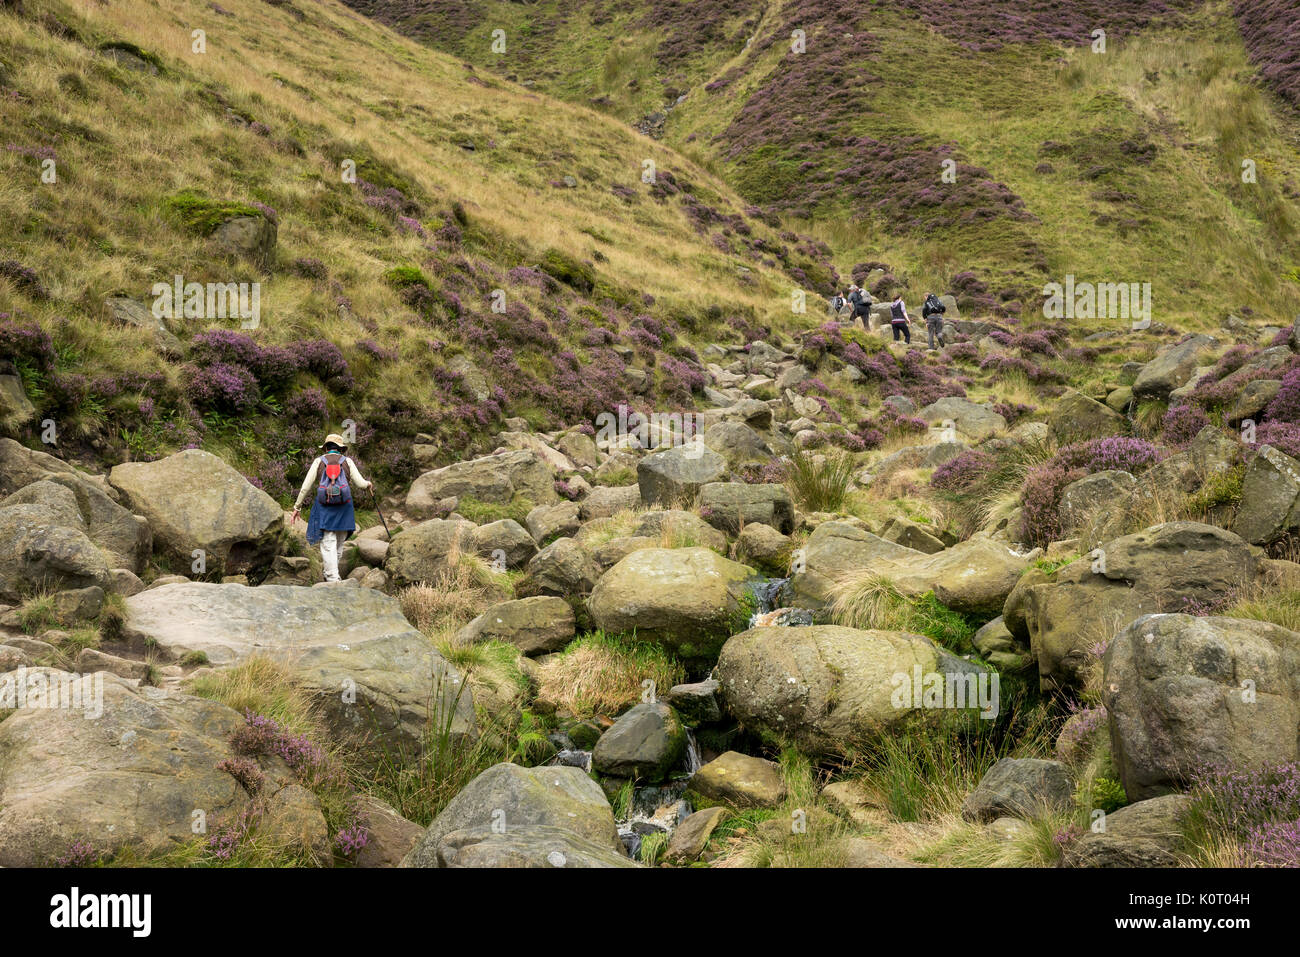 Hill walkers in the rugged landscape of Grindsbrook Clough near Edale in the Peak District national park, Derbyshire, England. Stock Photo